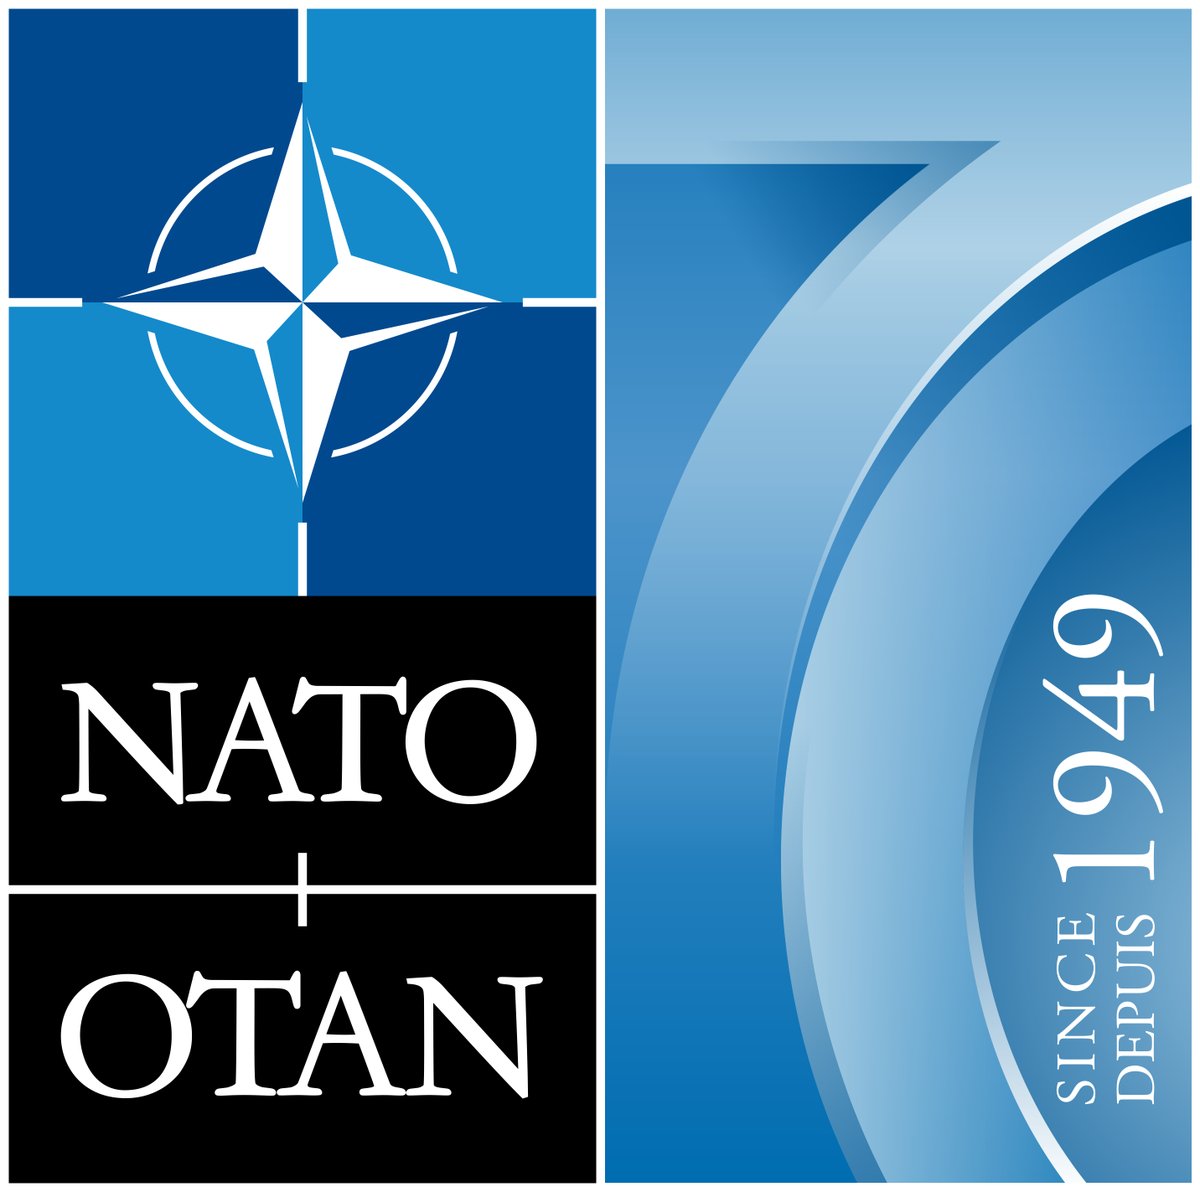 Portugal na NATO on Twitter: "NATO has released its commemorative logo 🎉 Stay tuned for following news and events on the Alliance's 70th anniversary. Find out more at: https://t.co/wihjtuPcII https://t.co/5JnAMFLEja" / Twitter